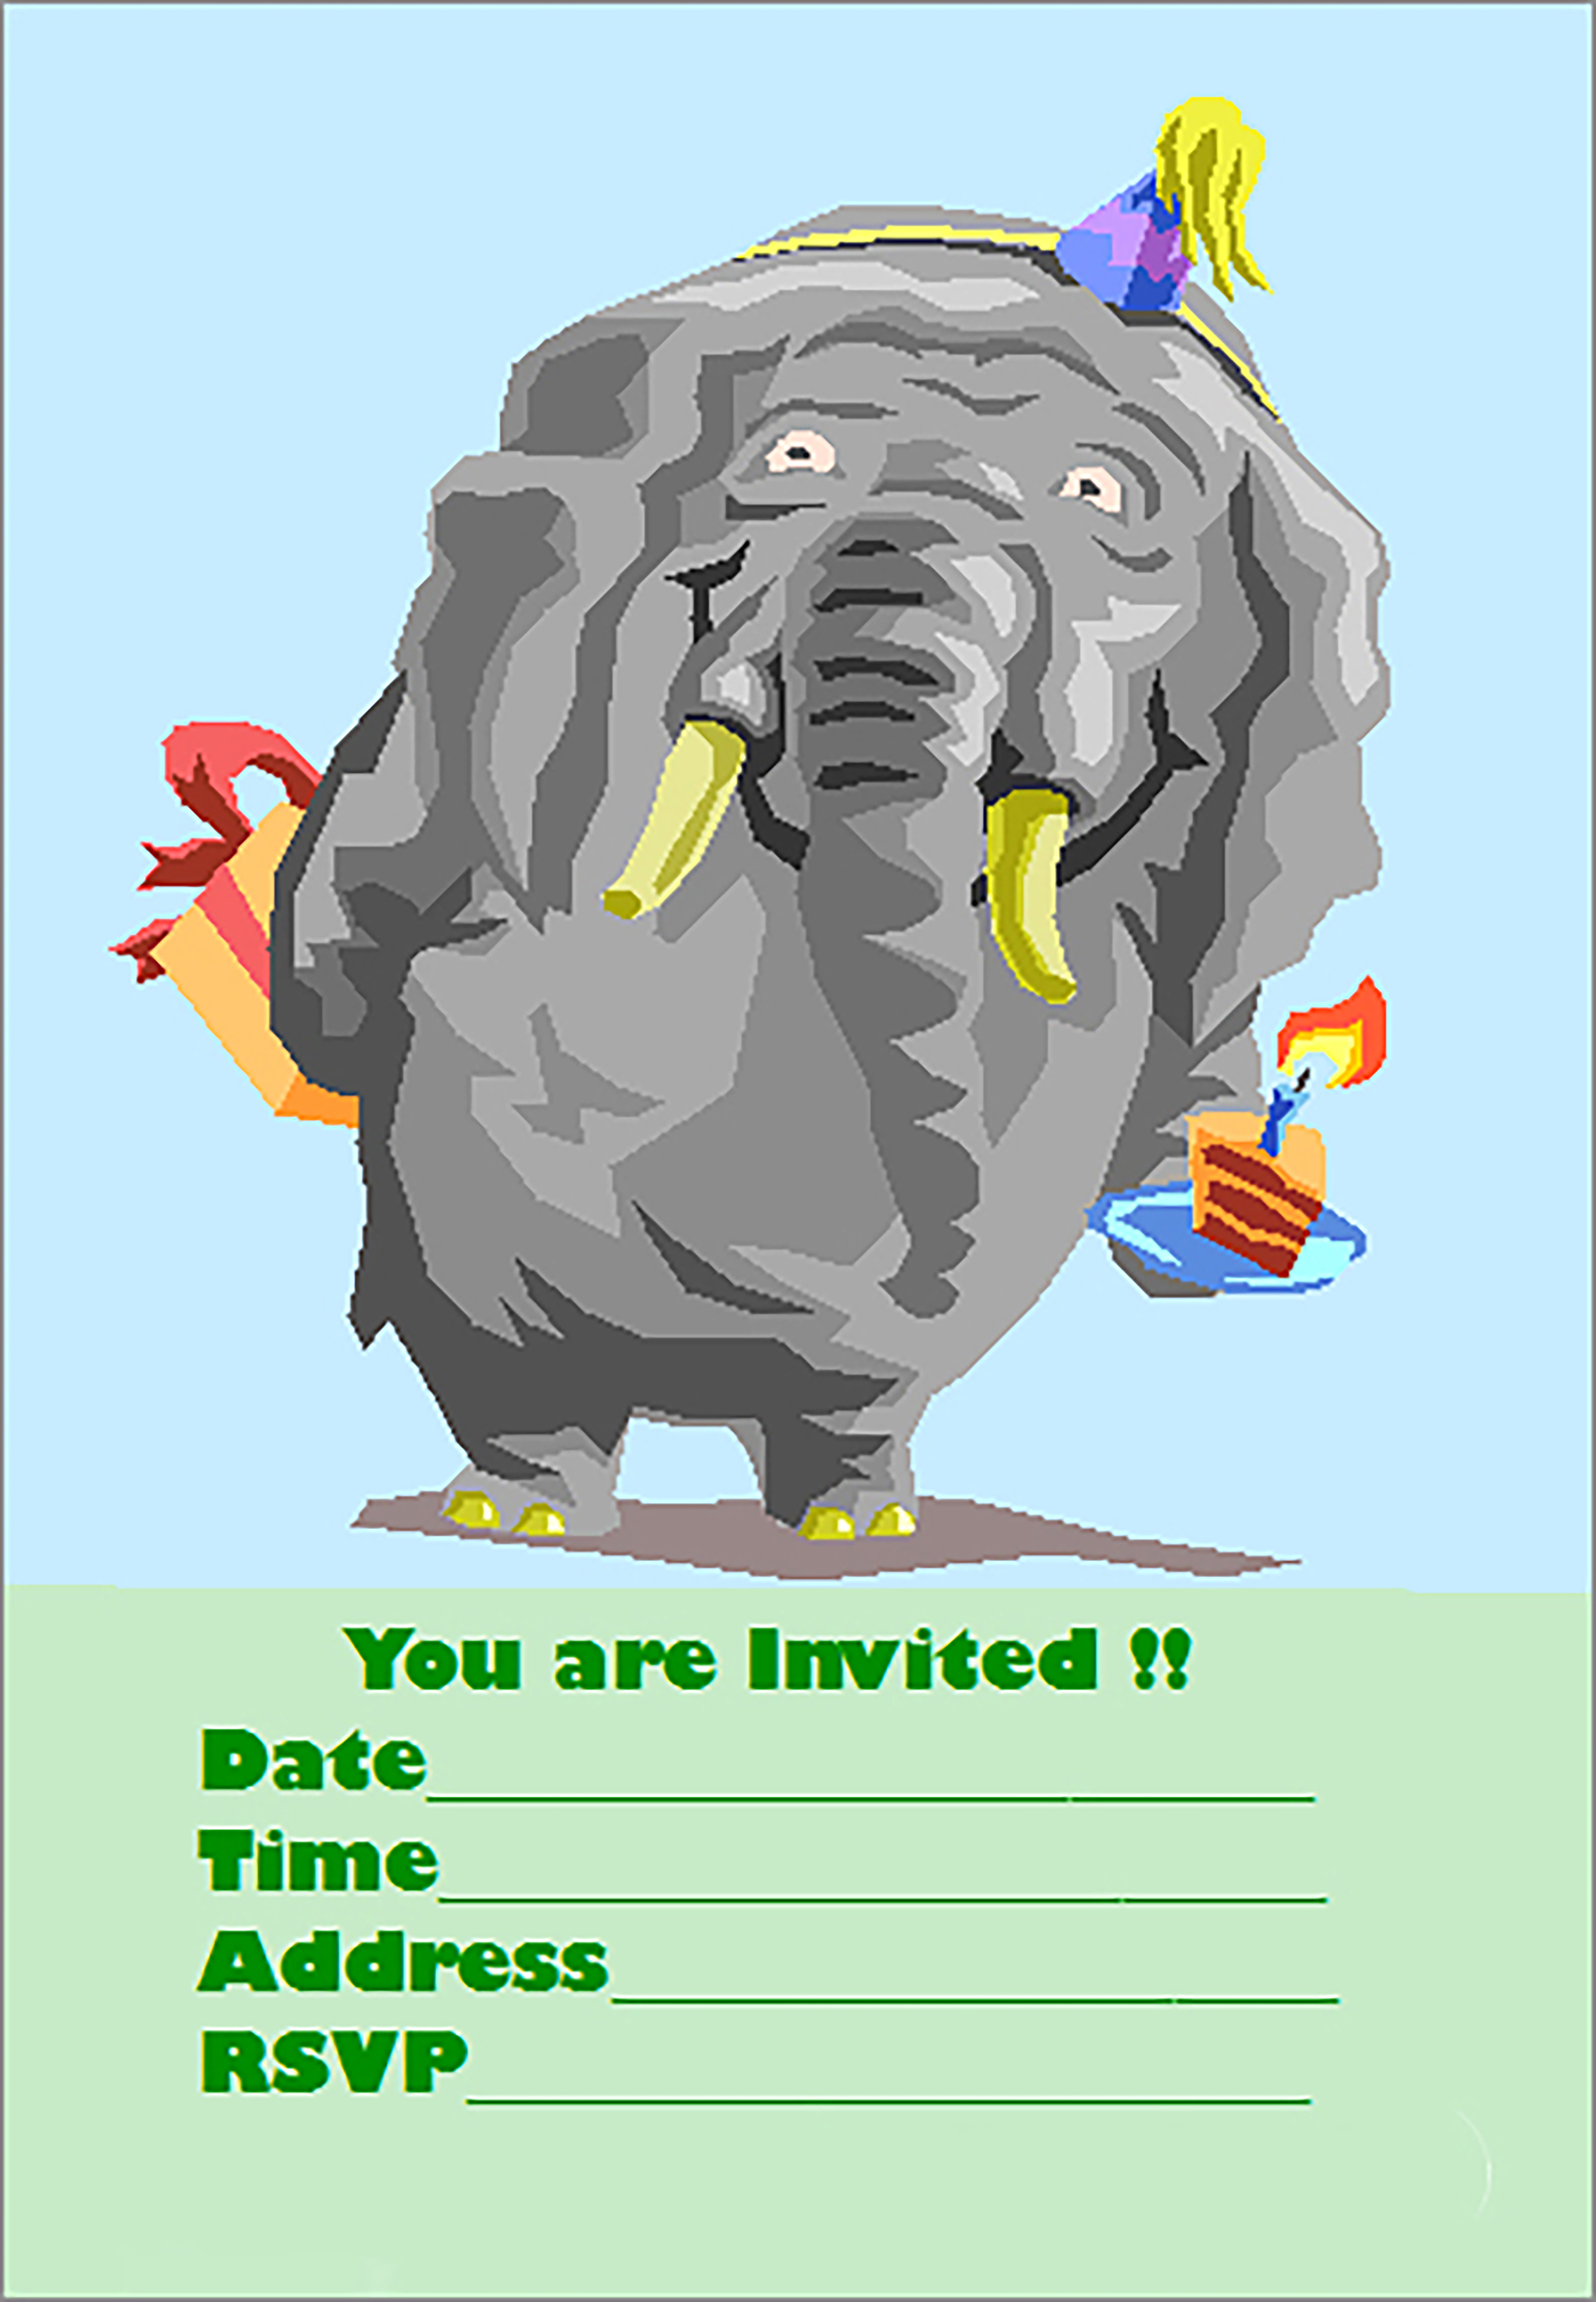 Example of free printable birthday party invitations template: Cute elefant with hat, gift and a cake with a candle in.